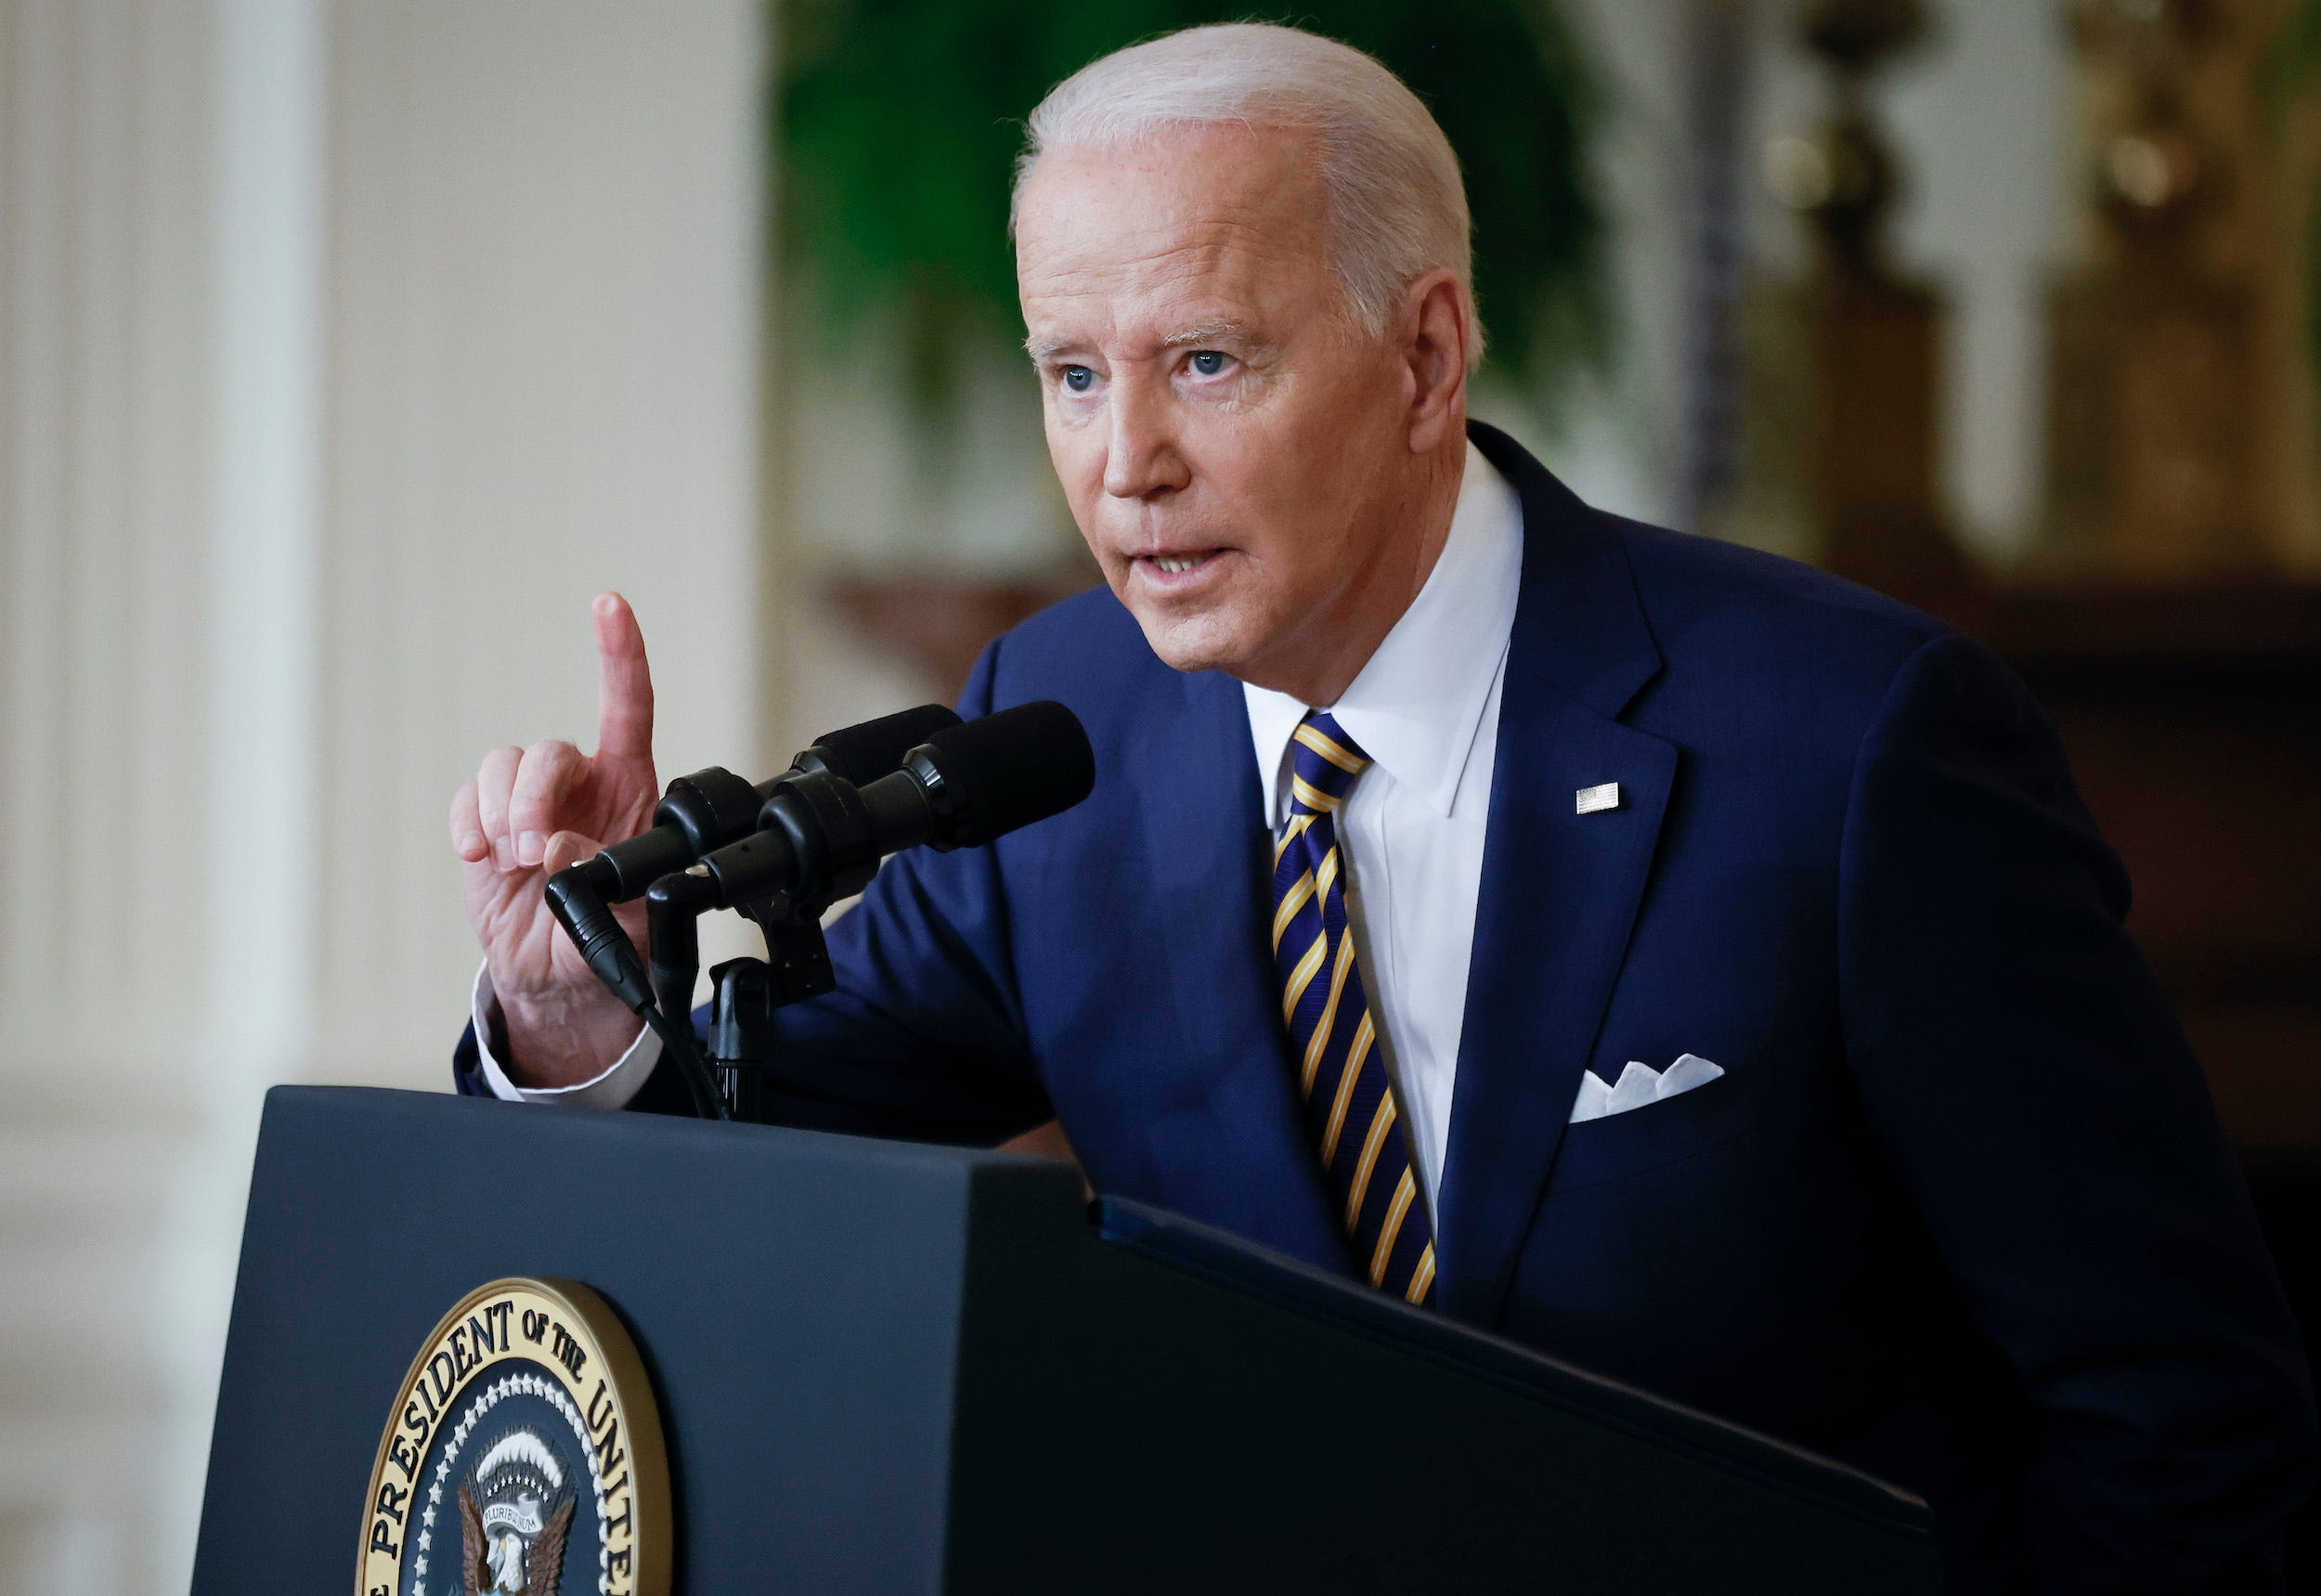 President Joe Biden at his first press conference of 2022.